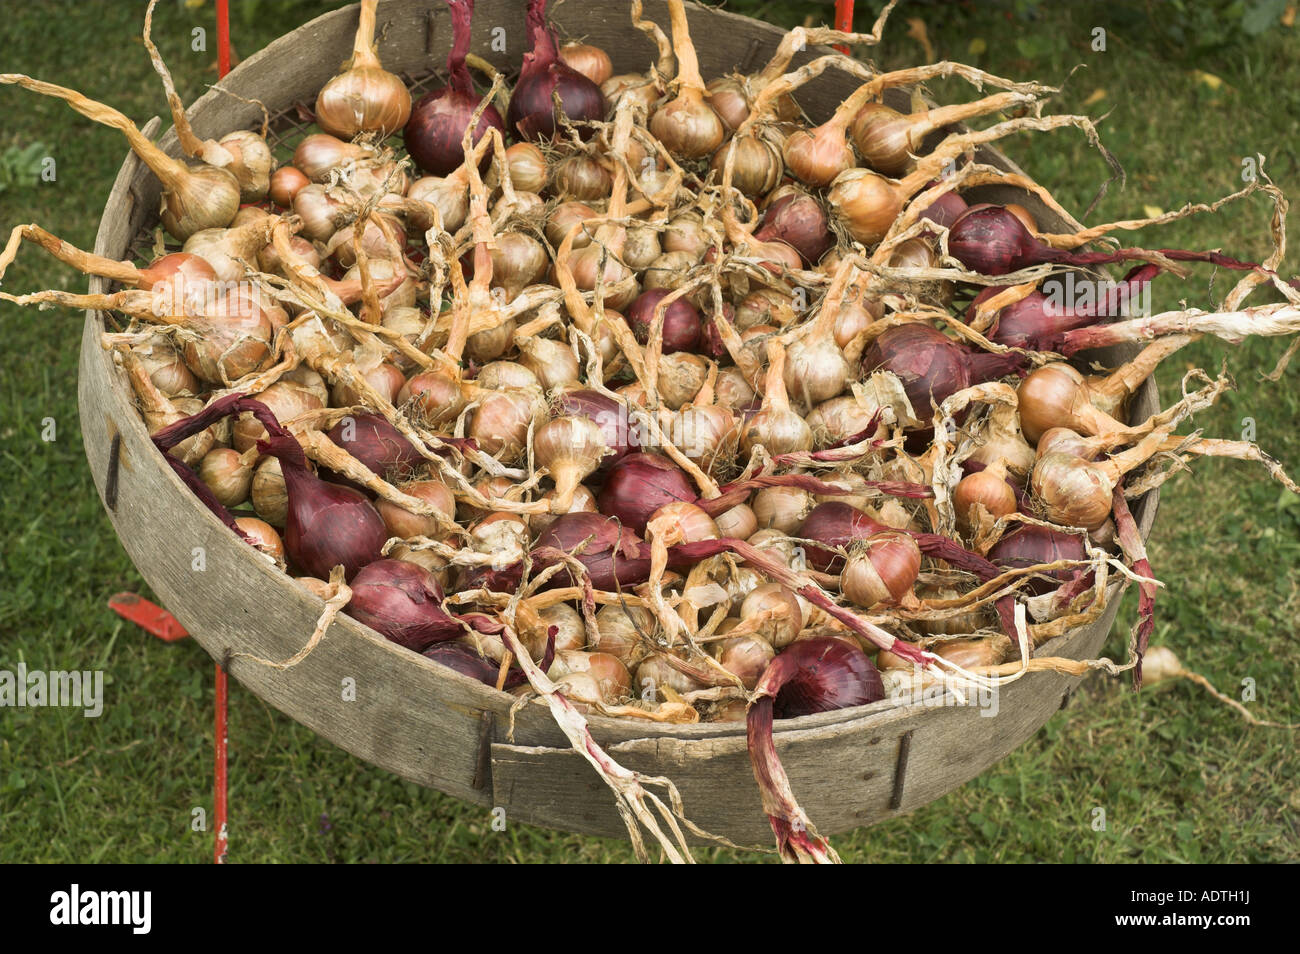 Home grown shallots and red onions being dried in an old sieve outside in late summer England August Stock Photo